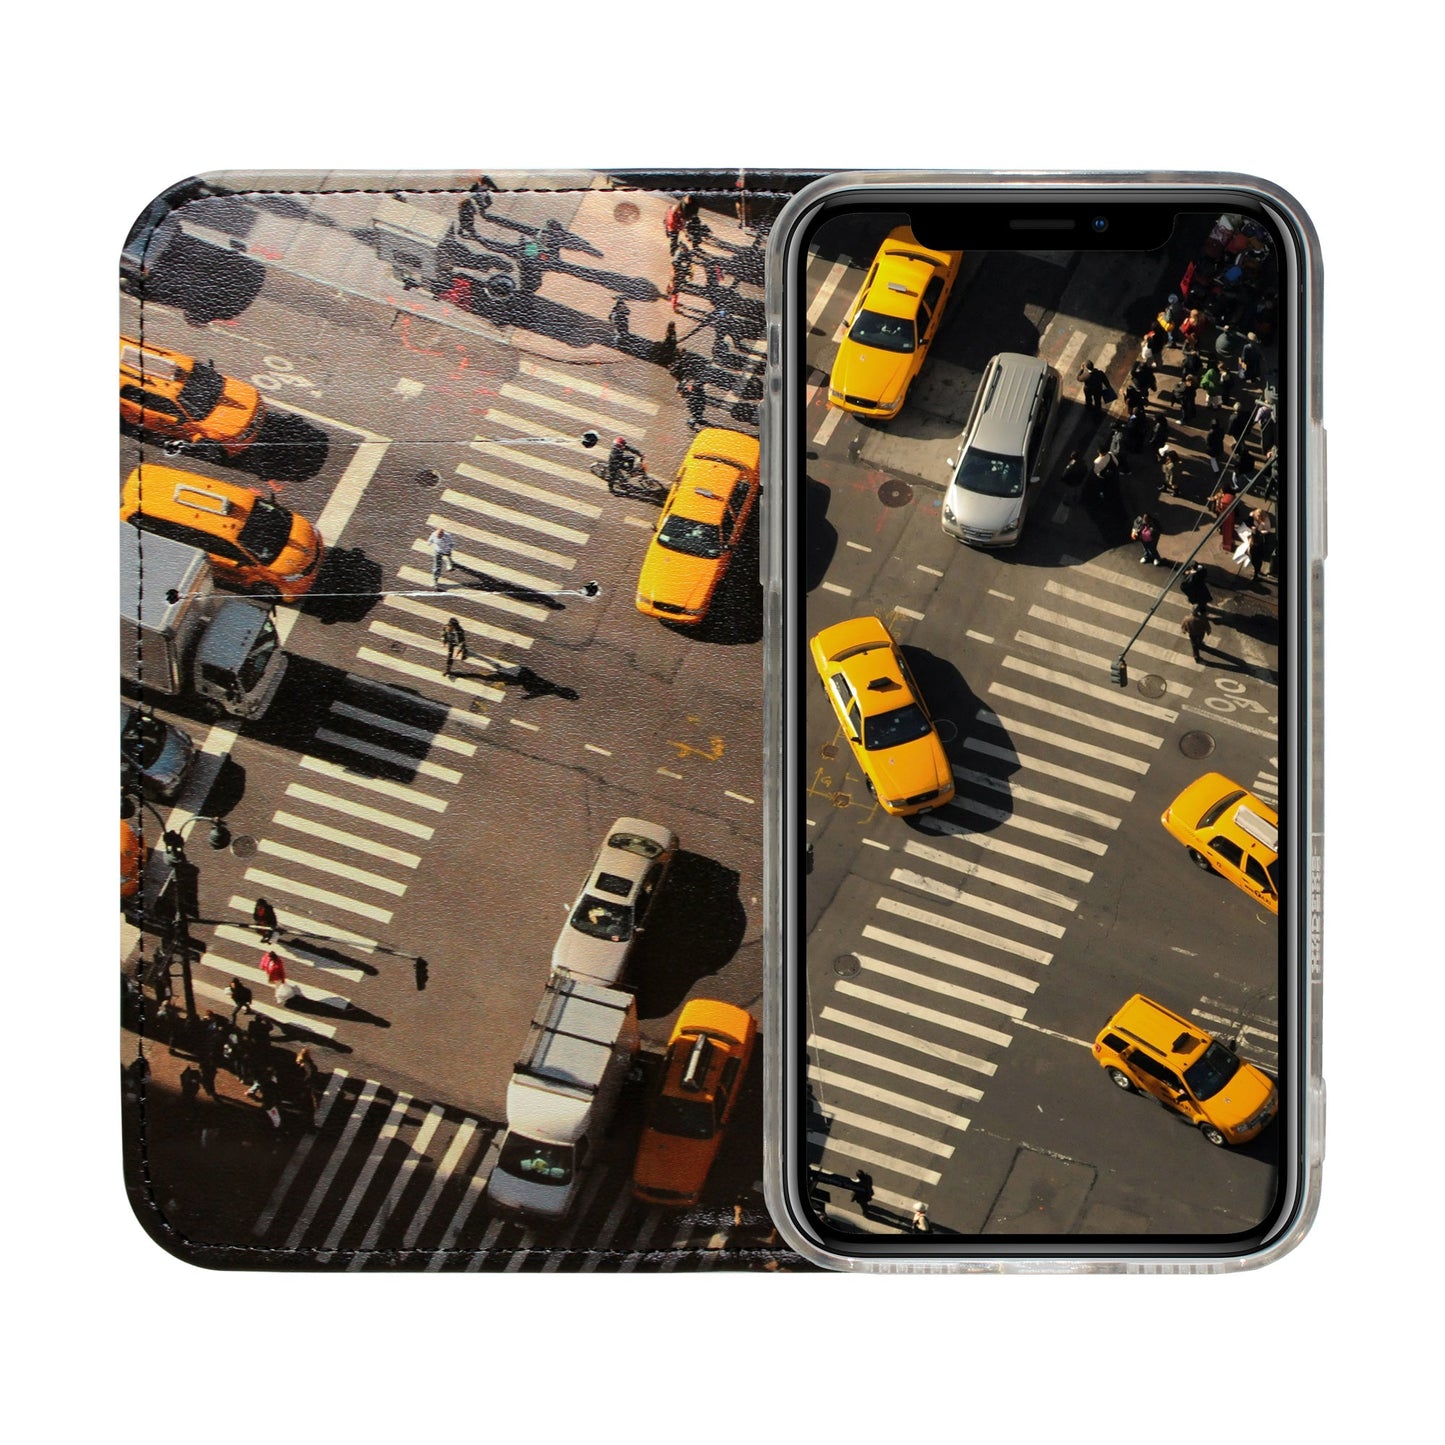 Coque New York City Panorama pour iPhone XS Max